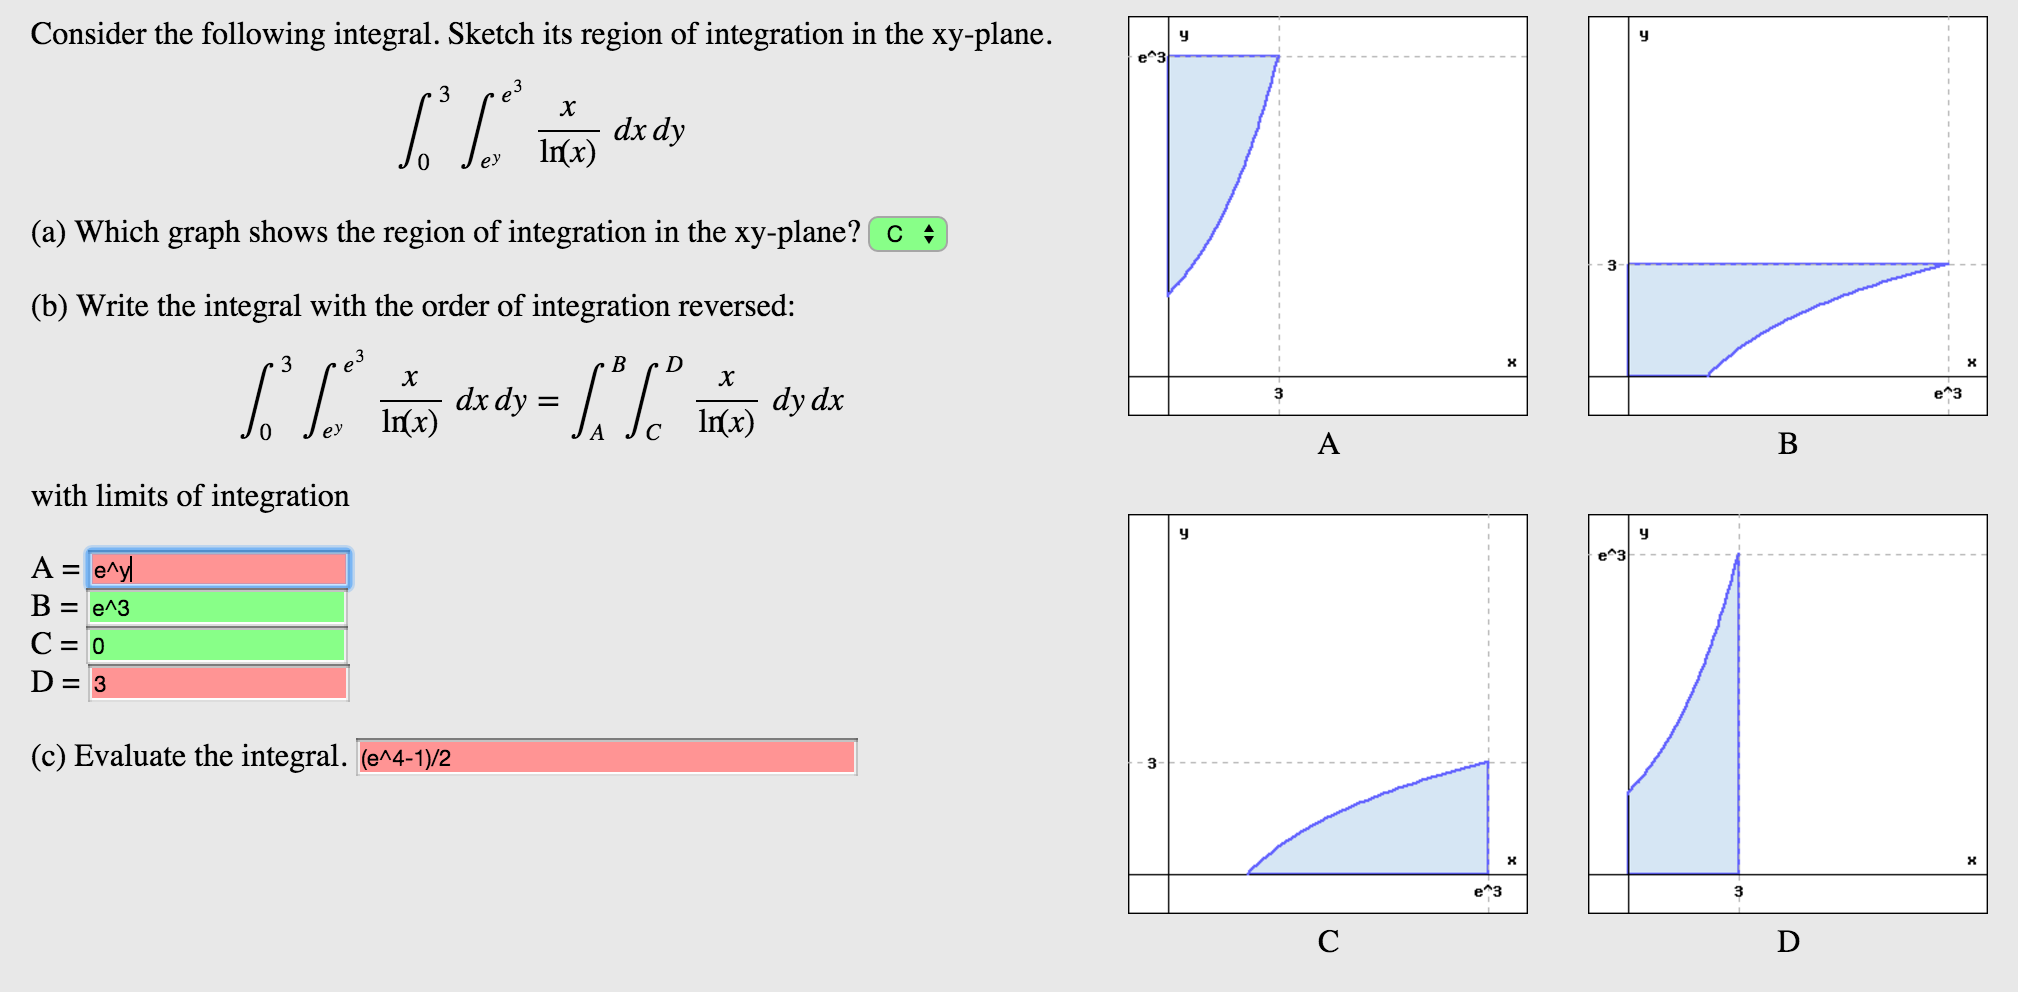 Sketch the region of integration and evaluate the following integral.